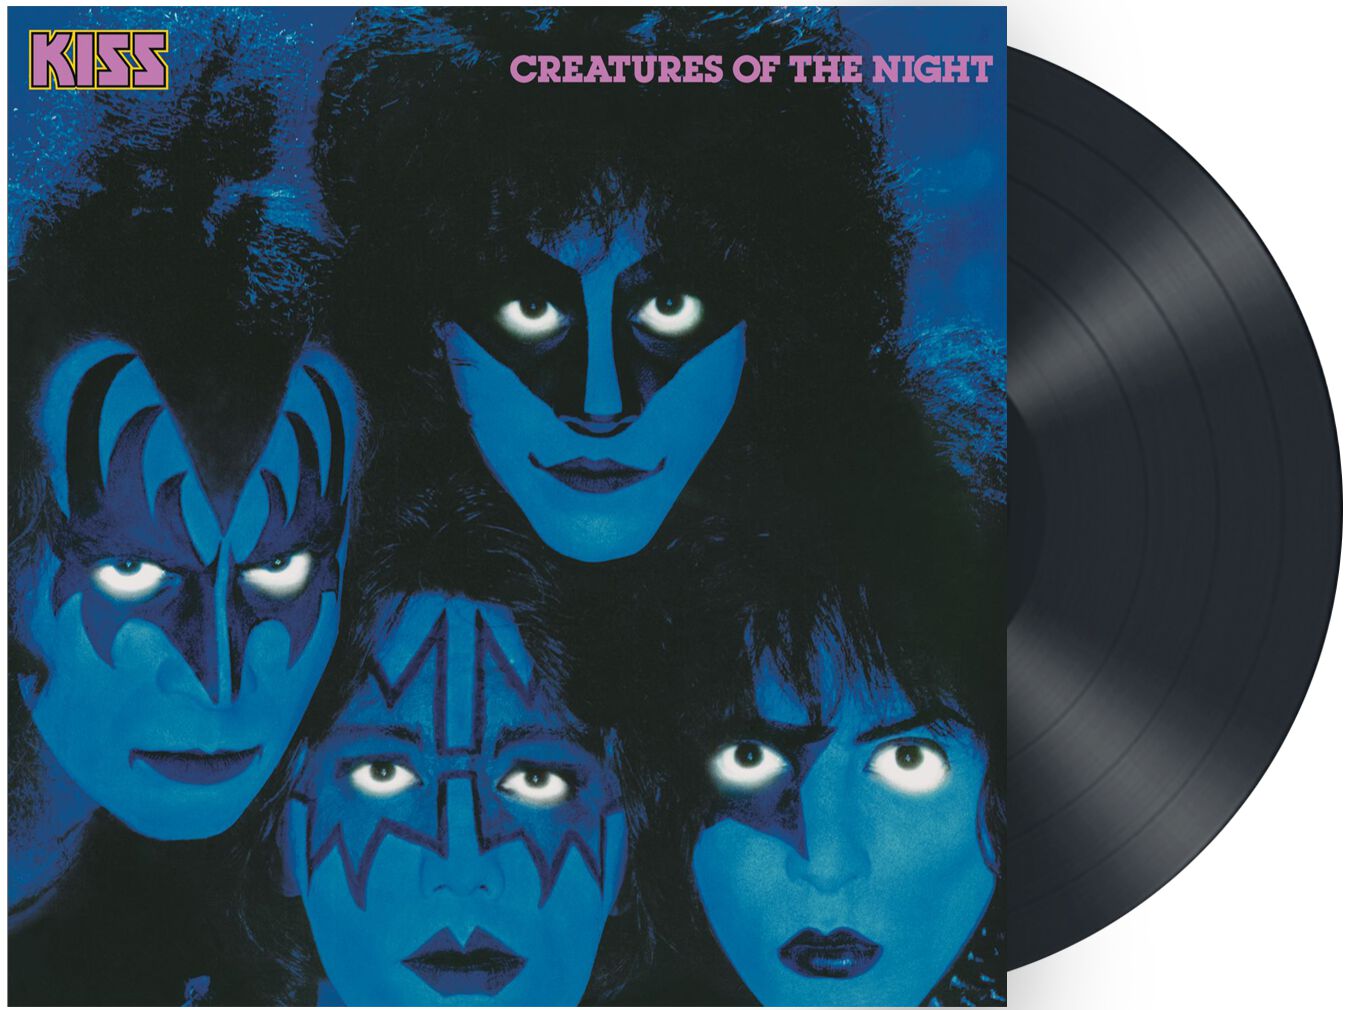 Kiss Creatures of the night LP multicolor